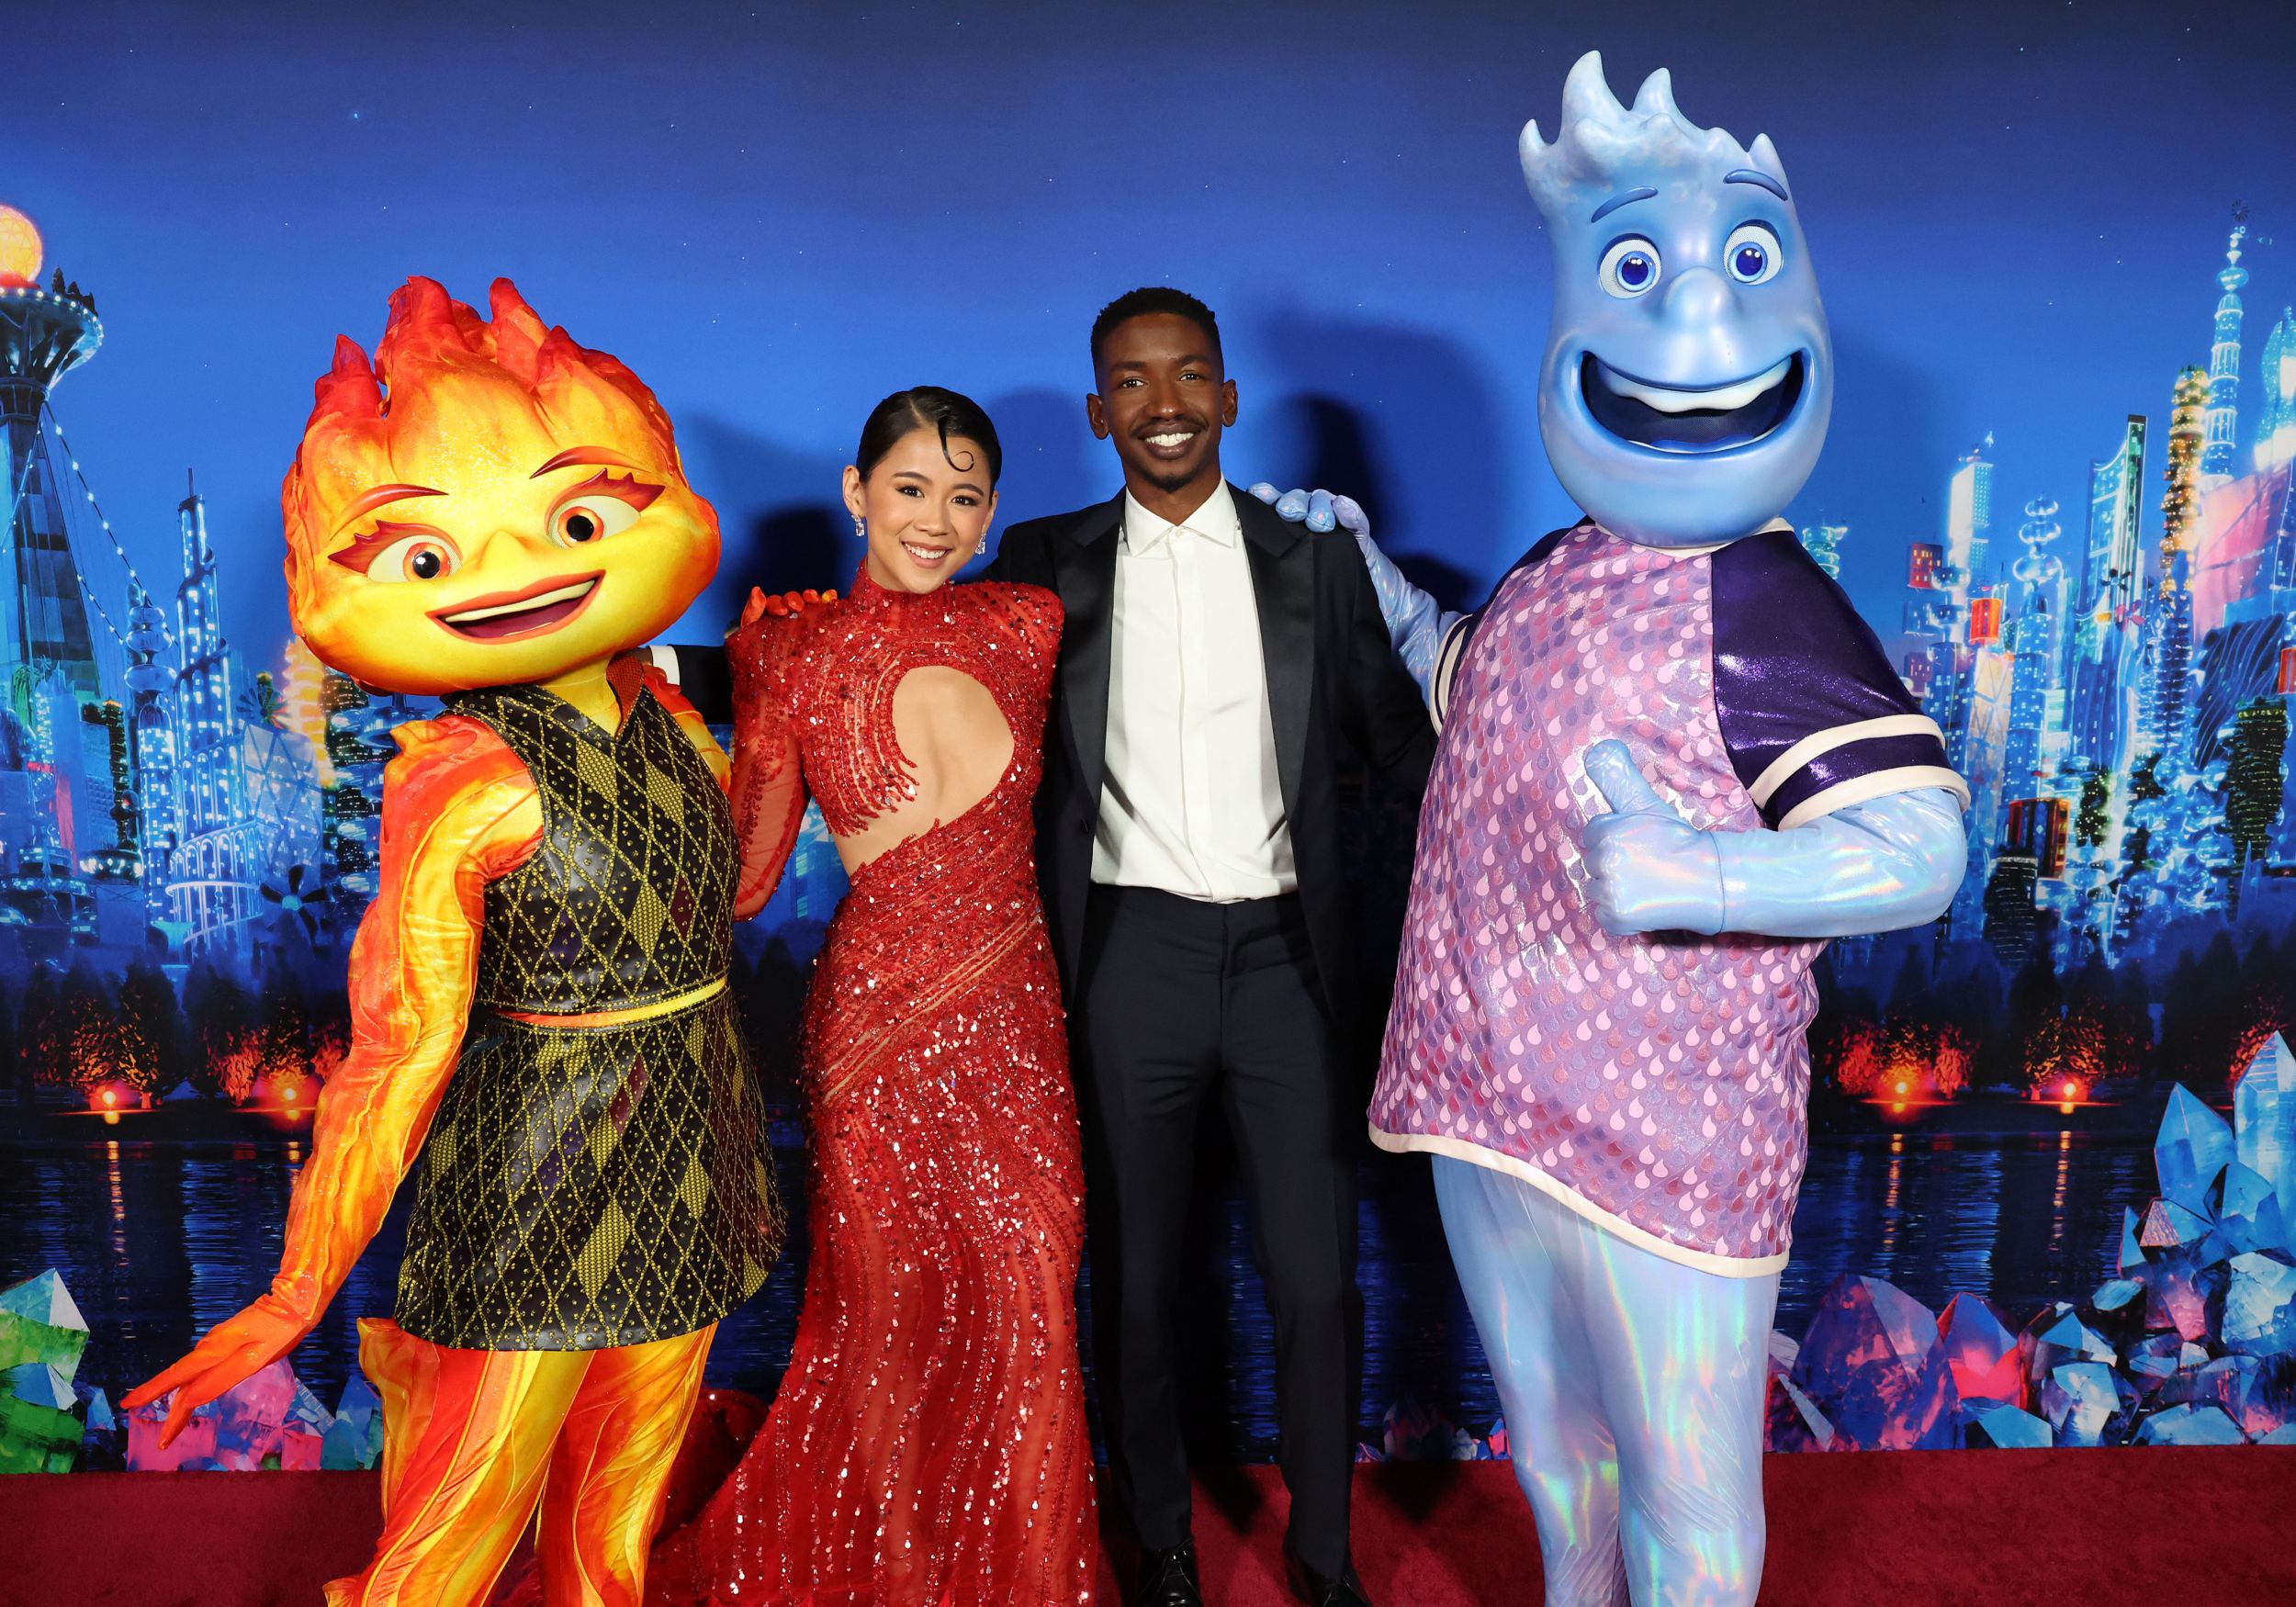 Elemental premiere pics - Filmmakers and Disney parks characters